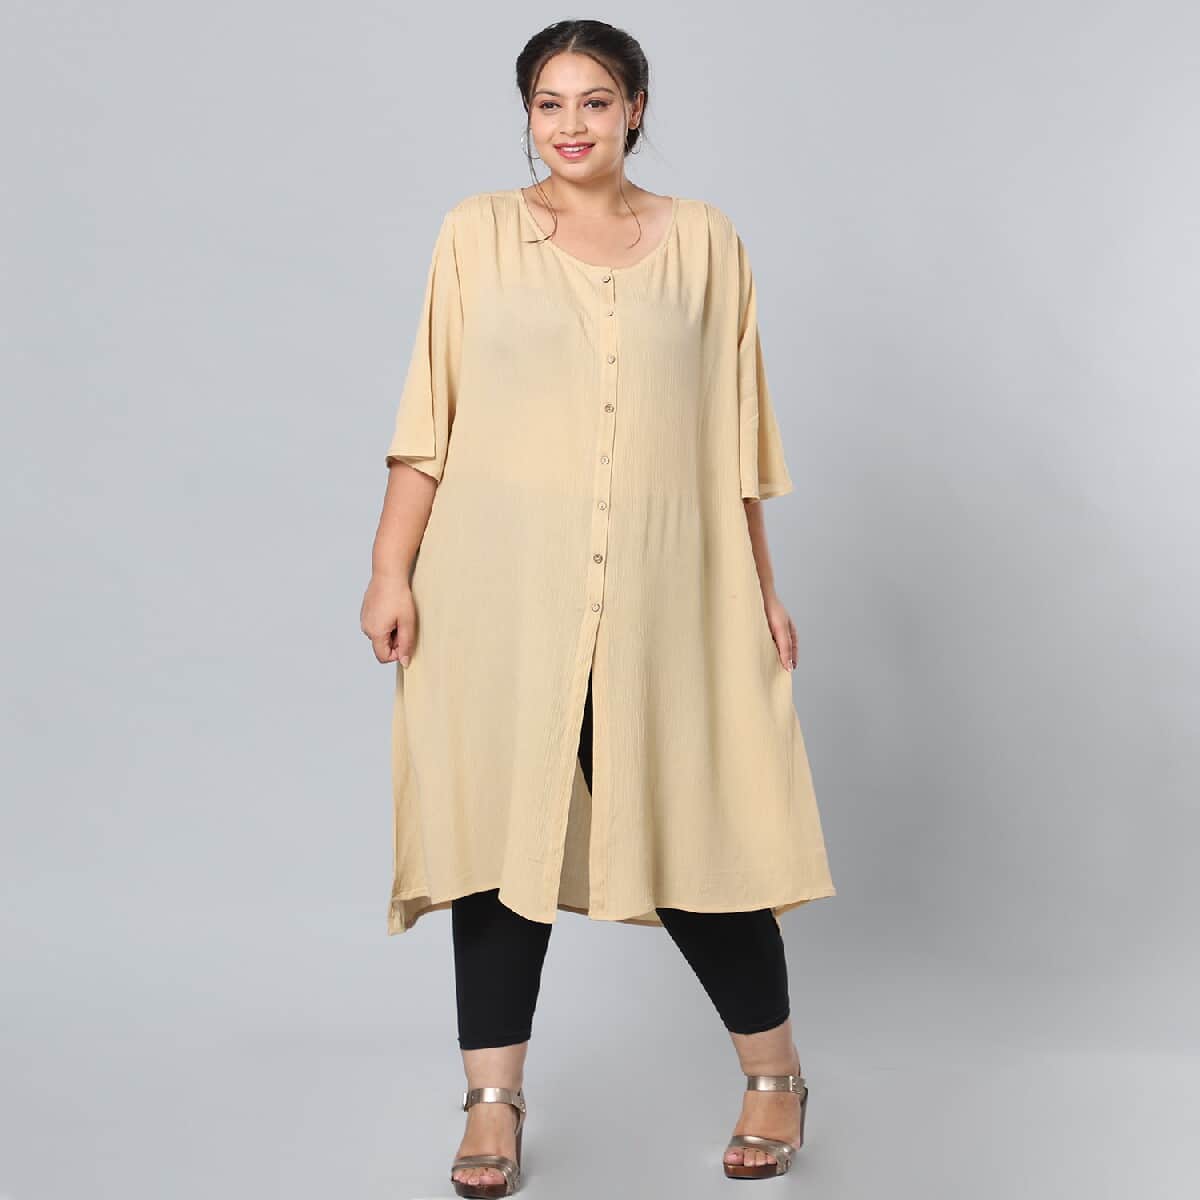 Beige 100% Rayon Top with Front Closure with Button- L/XL image number 1